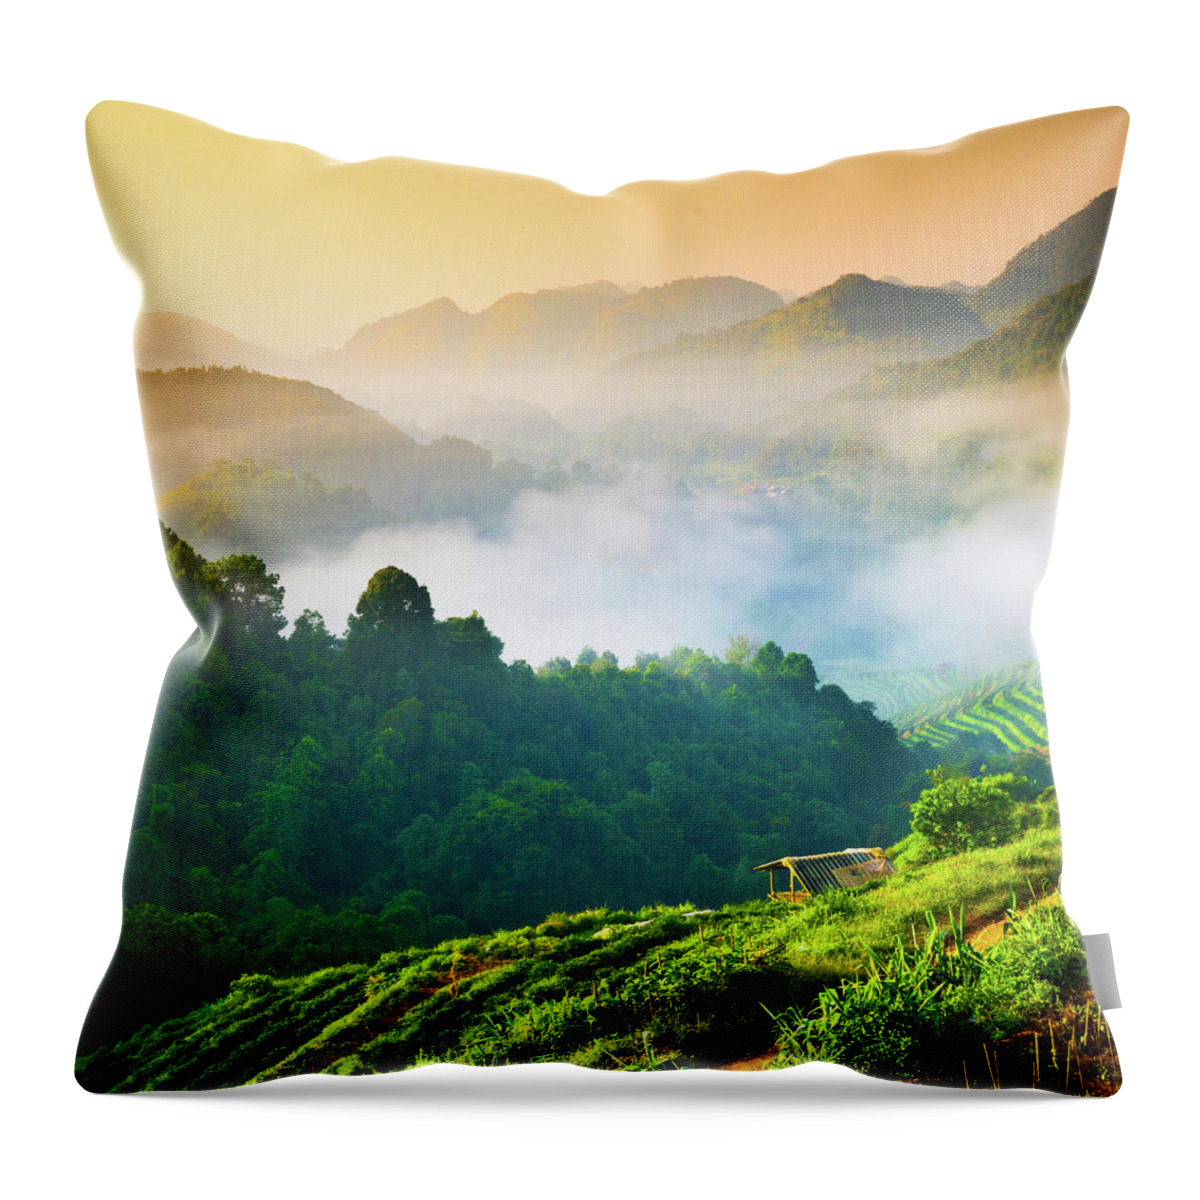 Scenics Throw Pillow featuring the photograph Beautiful Sunshine At Misty Morning by Primeimages